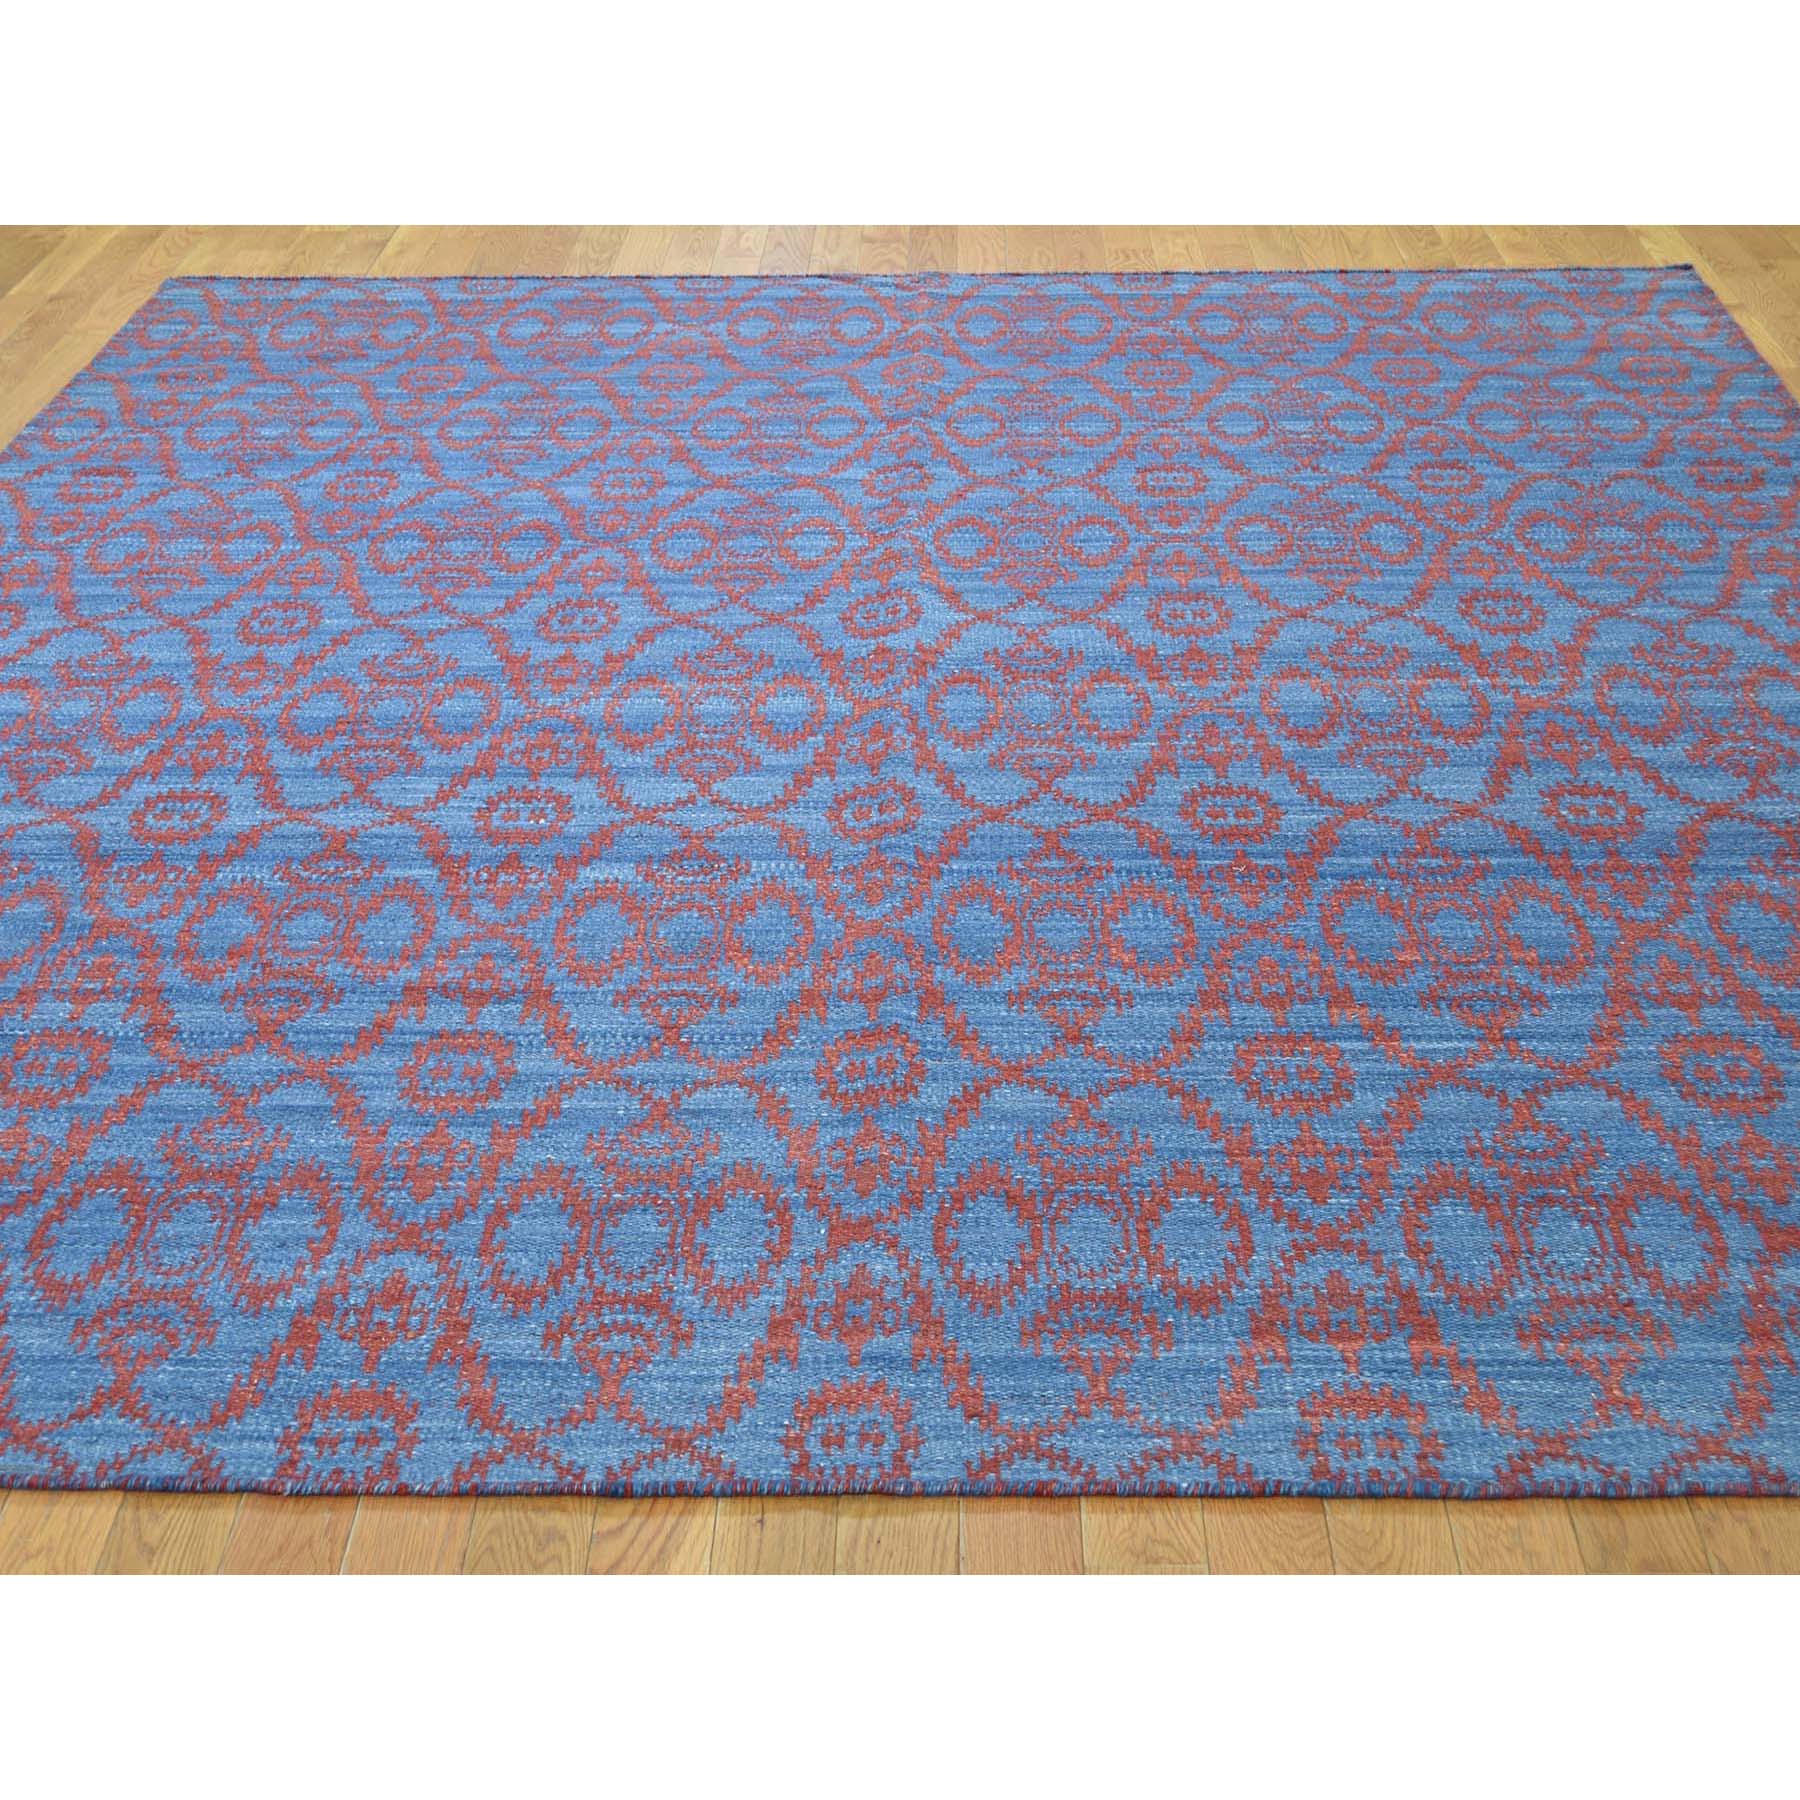 8-4 x9-8  Reversible Hand Woven Flat Weave Durie Kilim Oriental Rug 